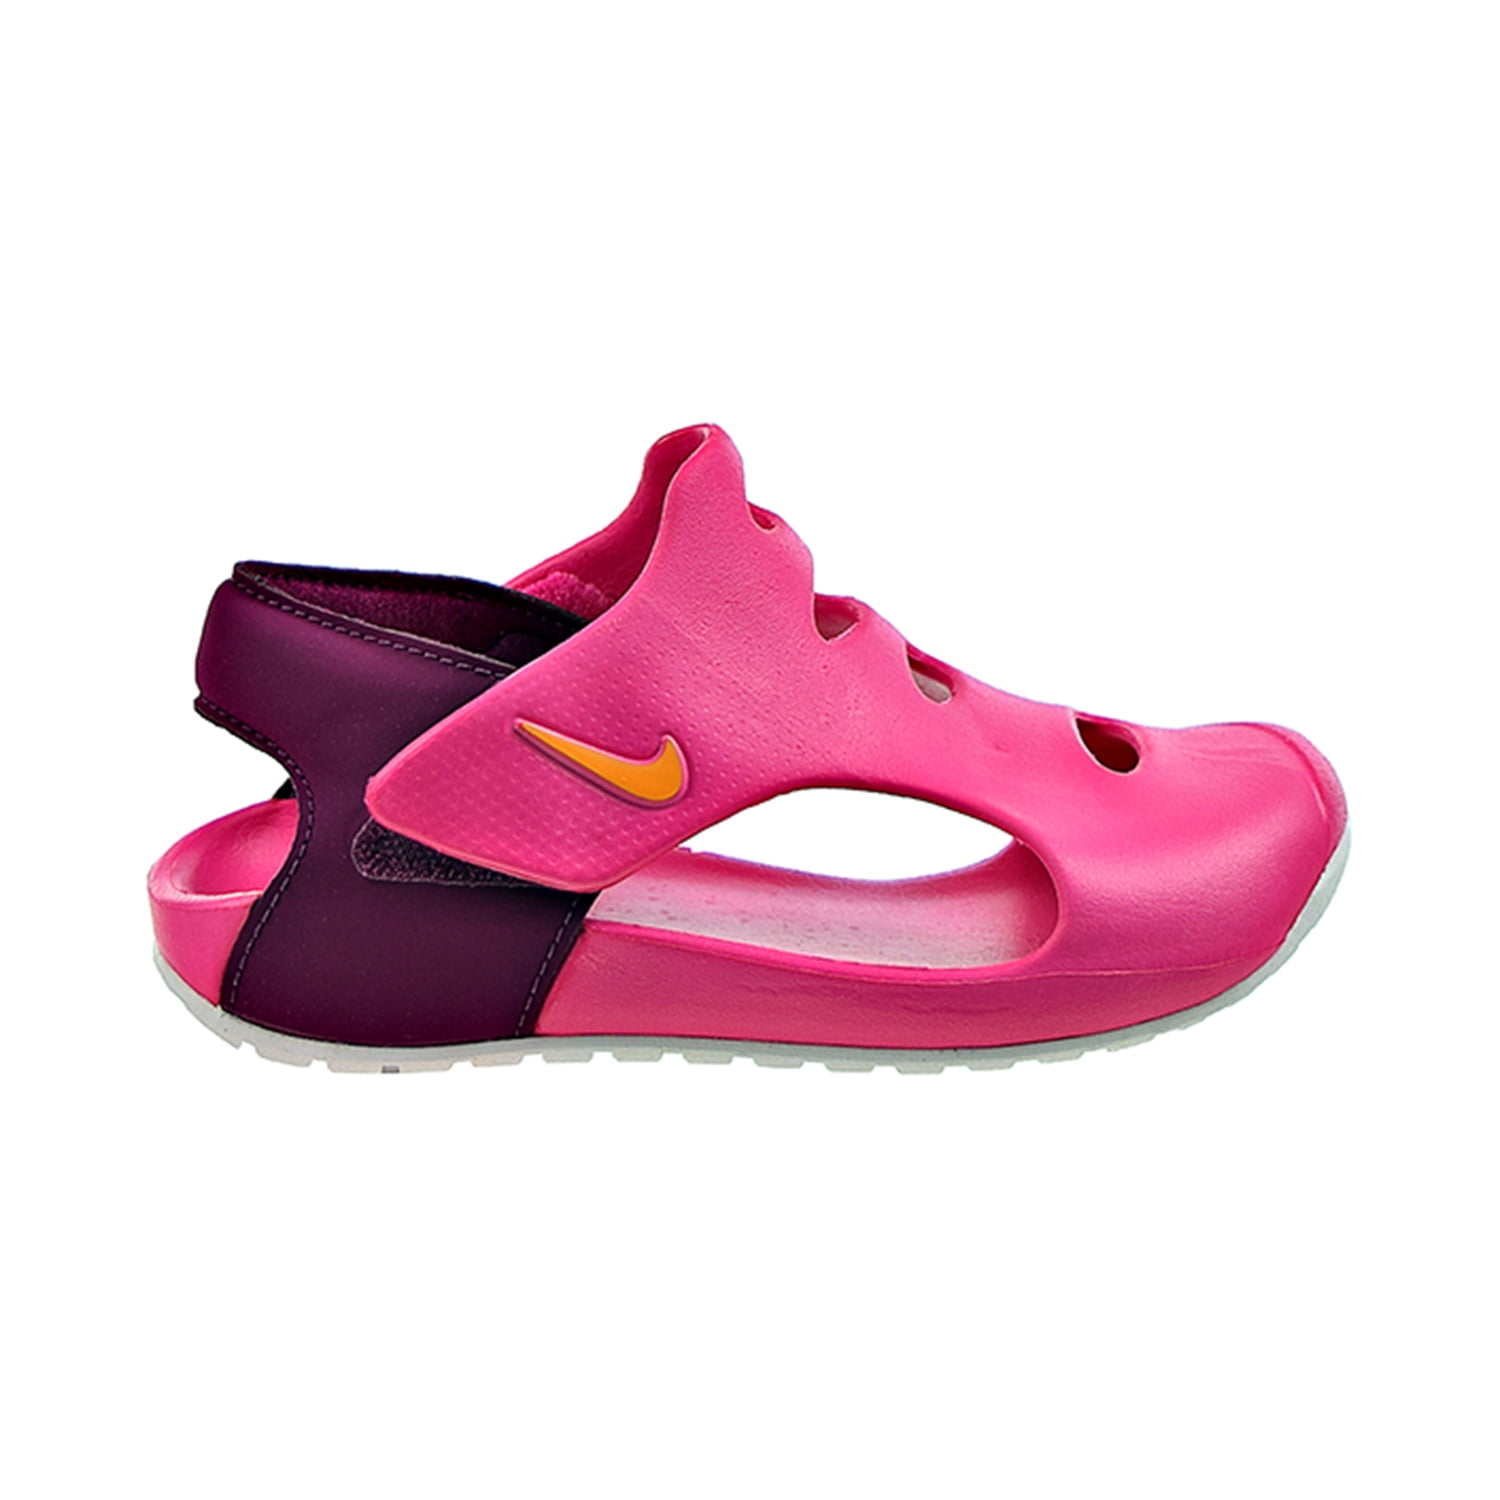 Nike Sunray Protect 3 (PS) Little Kids' Sandals Pink dh9462-602 Walmart.com